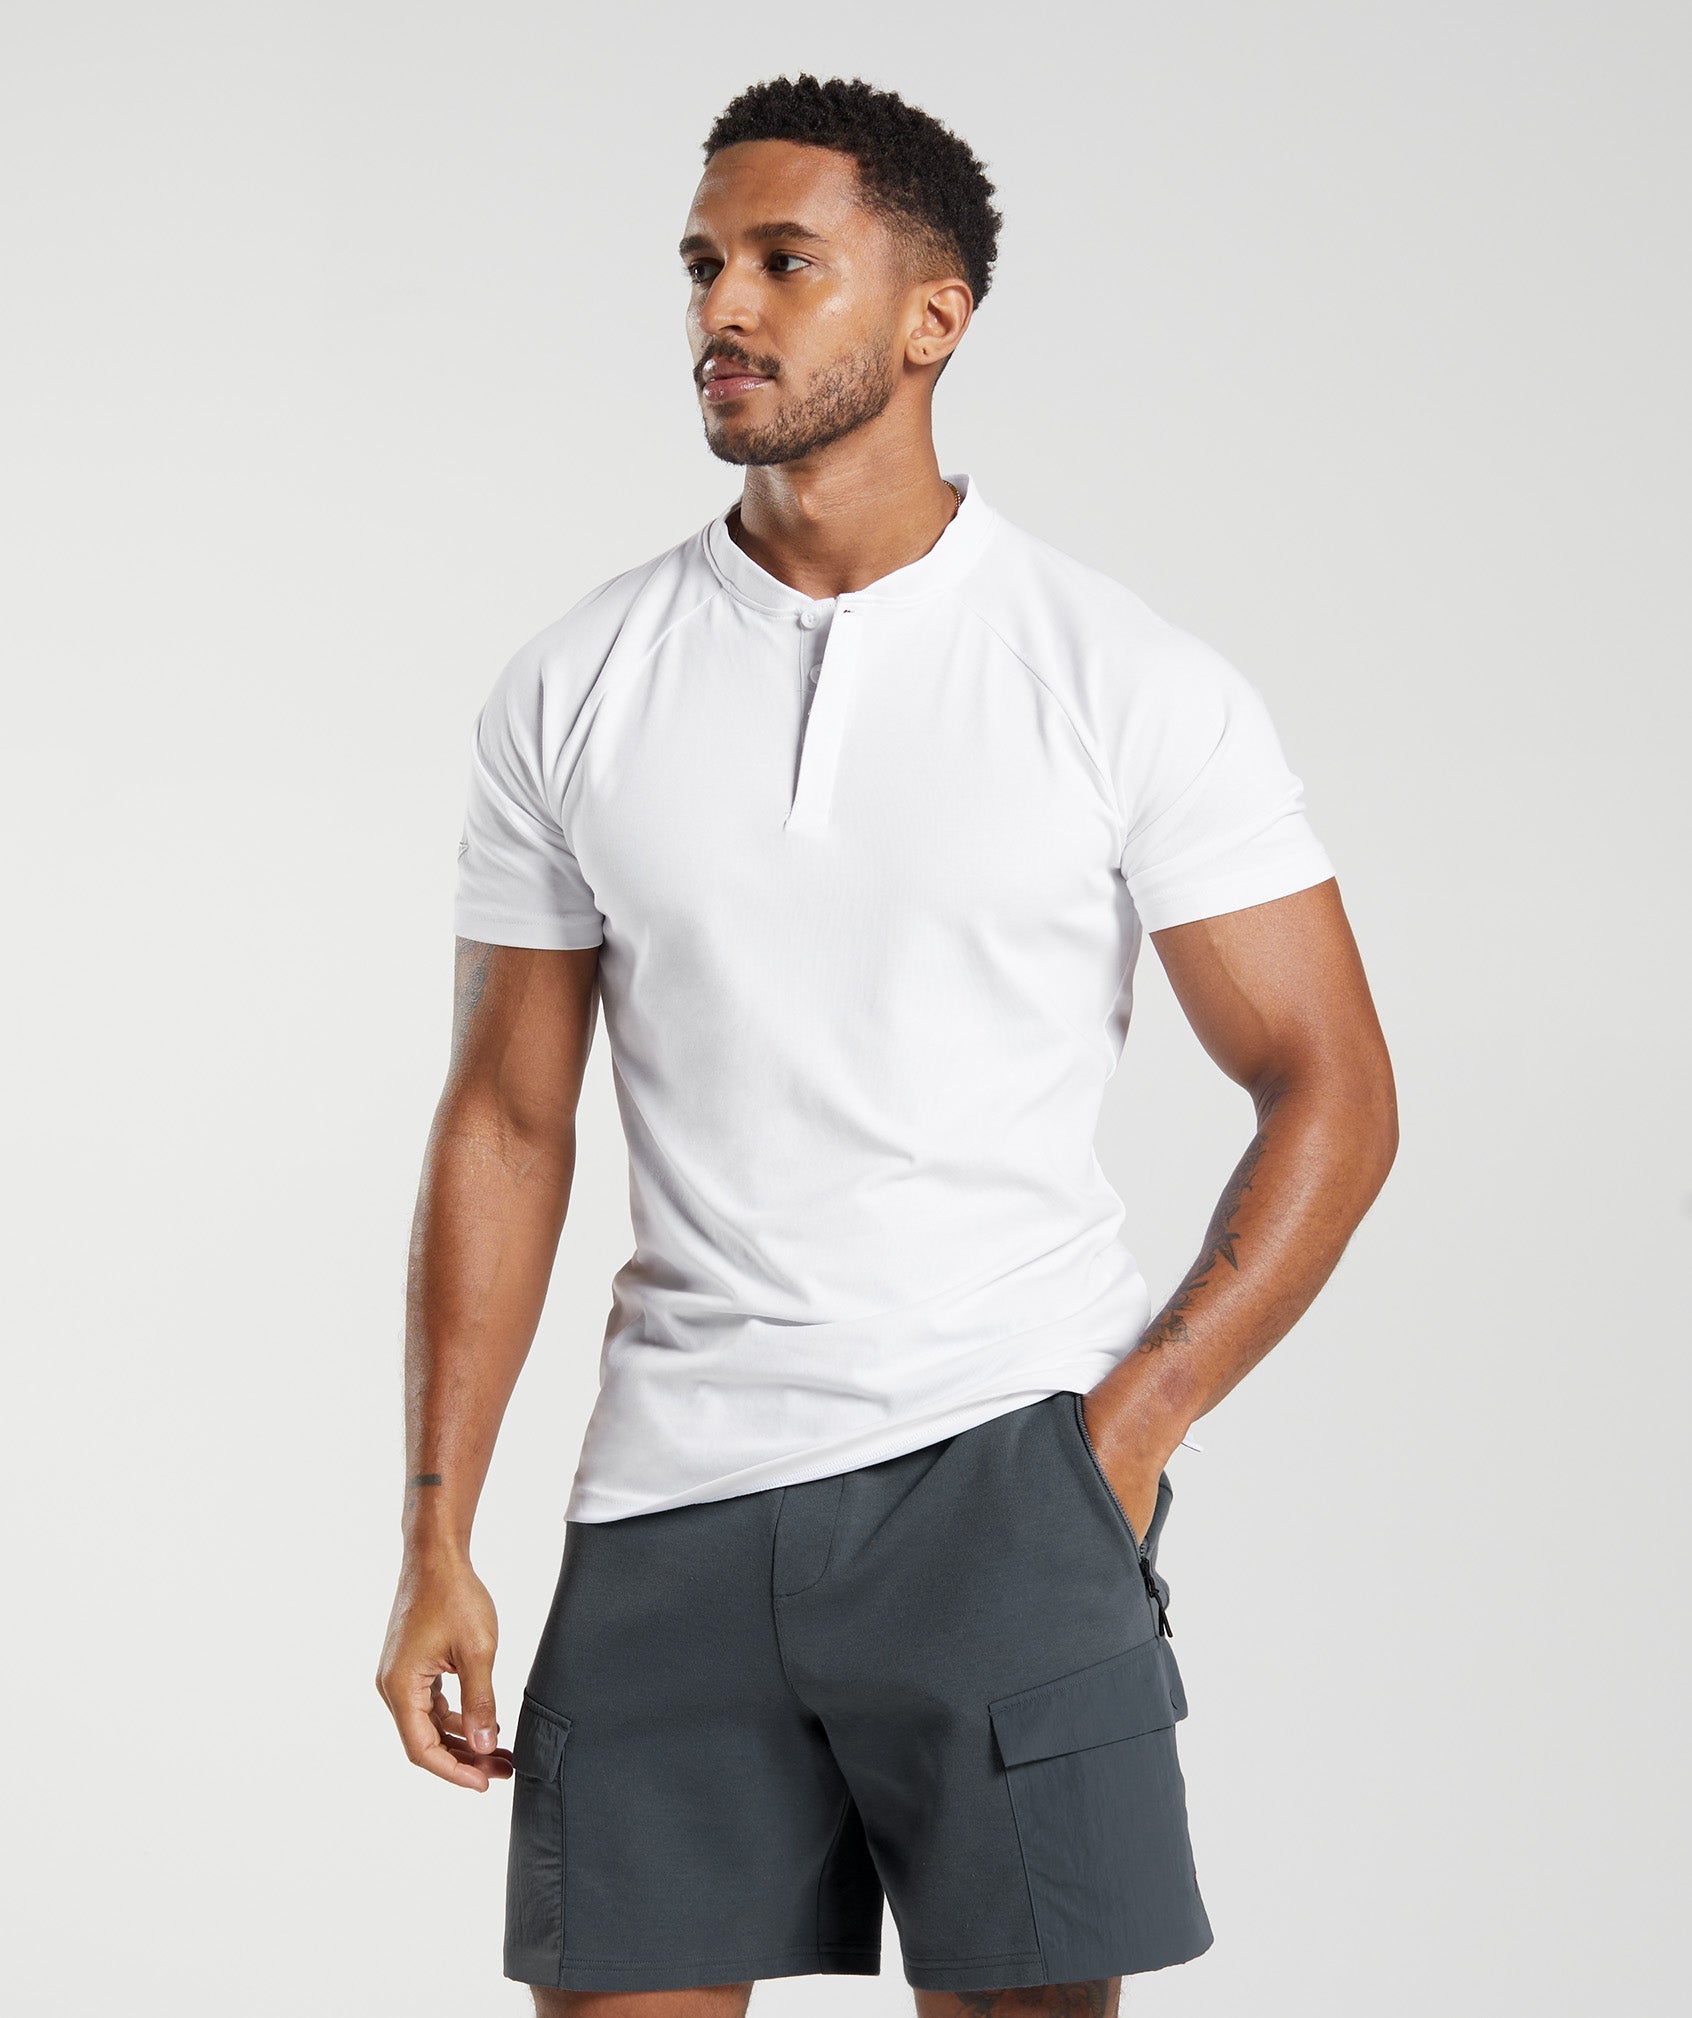 Rest Day Commute Polo Shirt in White - view 1